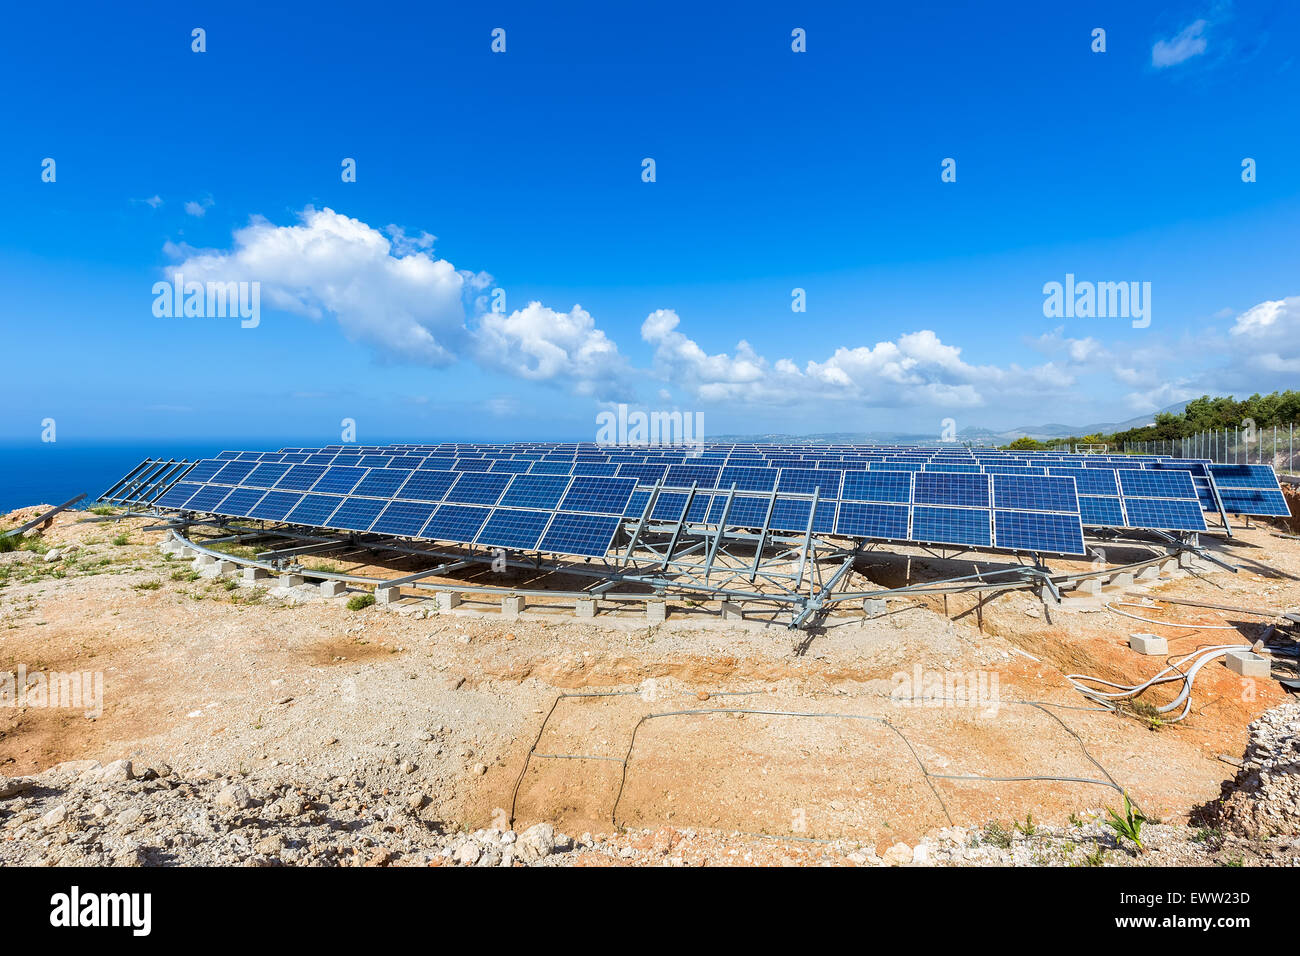 Field of many solar panels in rows on rotatable metal construction near blue sea in greece Stock Photo